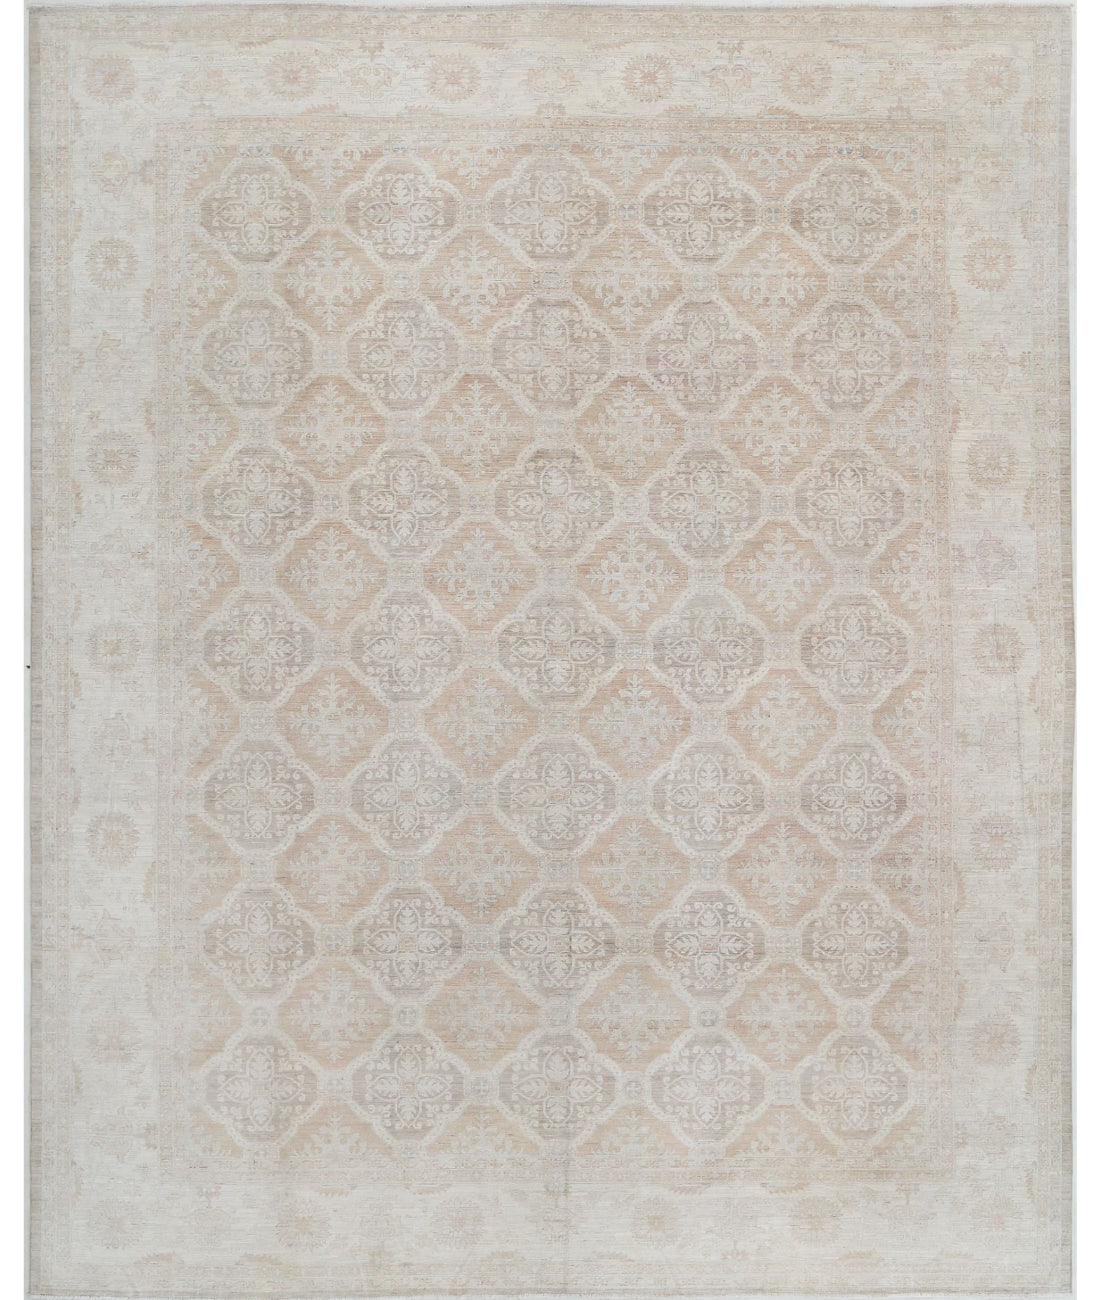 Hand Knotted Serenity Wool Rug - 11'9'' x 14'8'' 11'9'' x 14'8'' (353 X 440) / Taupe / Ivory